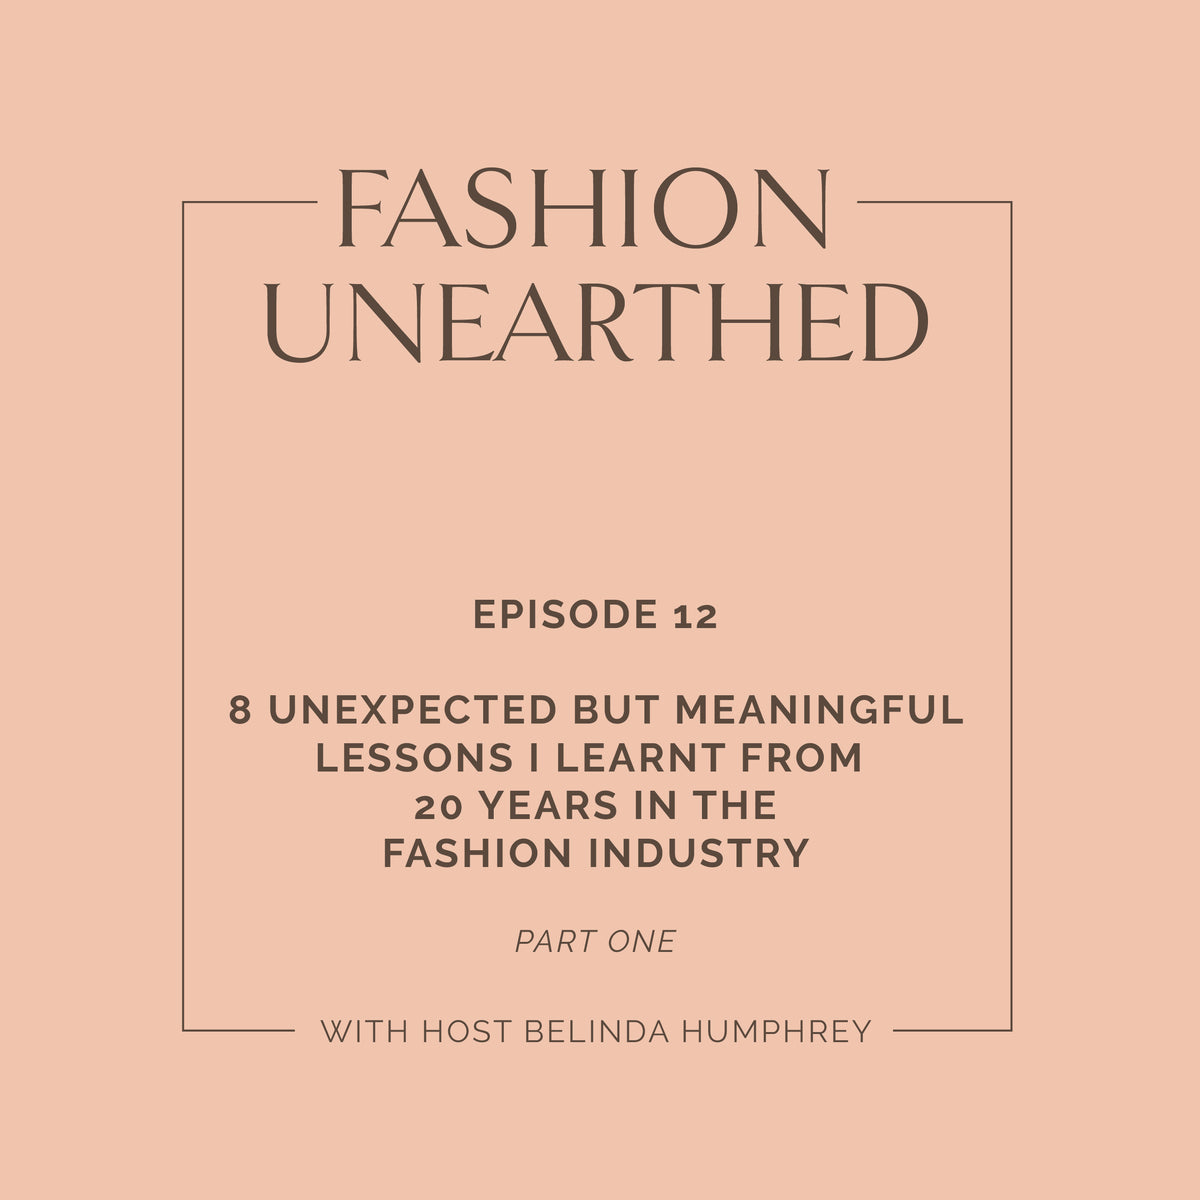 Episode 12: 8 unexpected but meaningful lessons I learnt from 20 years in the fashion industry - Part 1